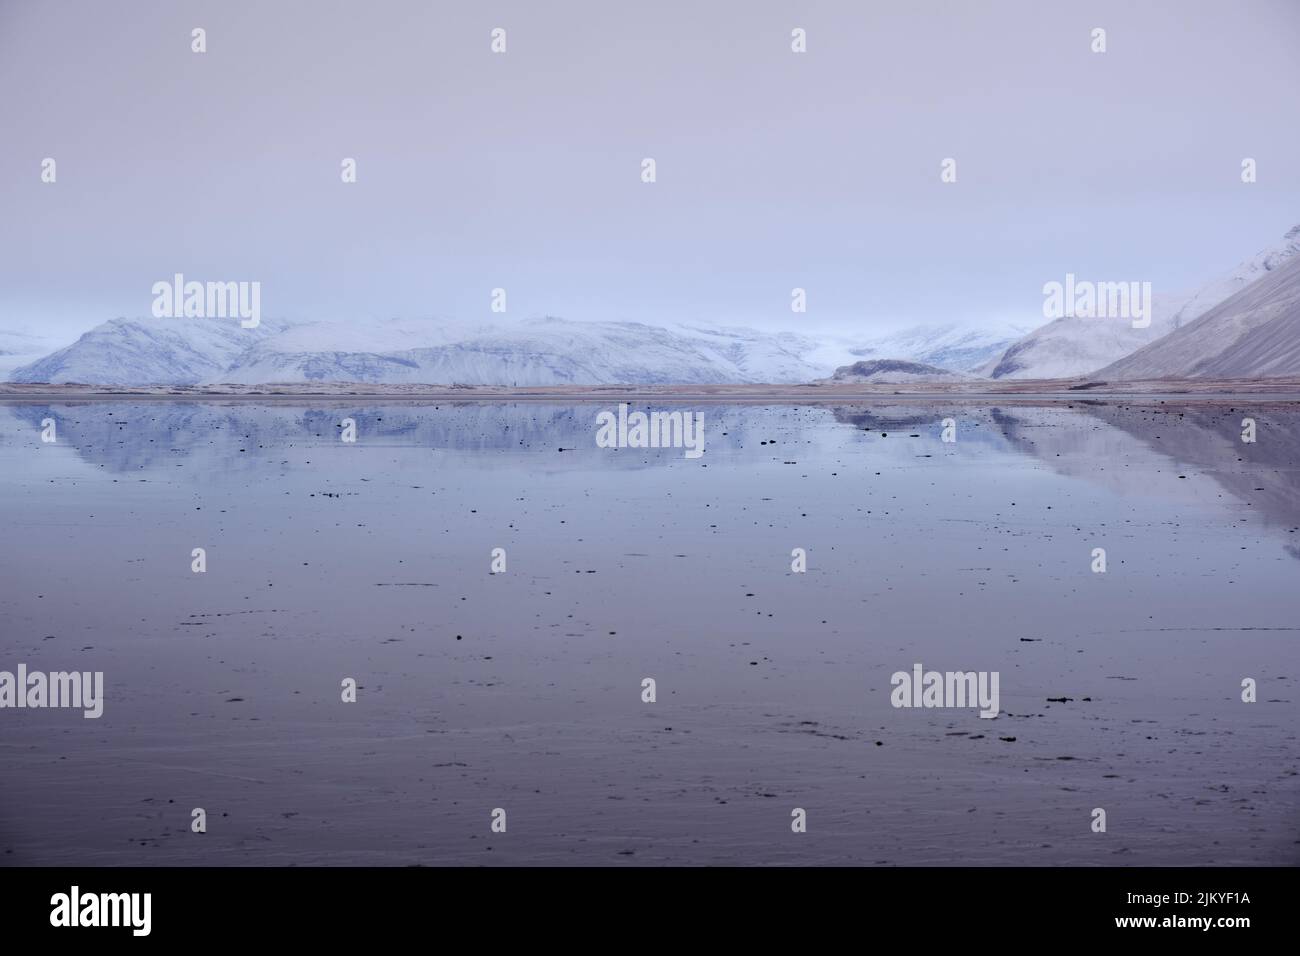 Thin strip of land viewed across reflective water. Muted colors give a calm, ethereal atmosphere Stock Photo